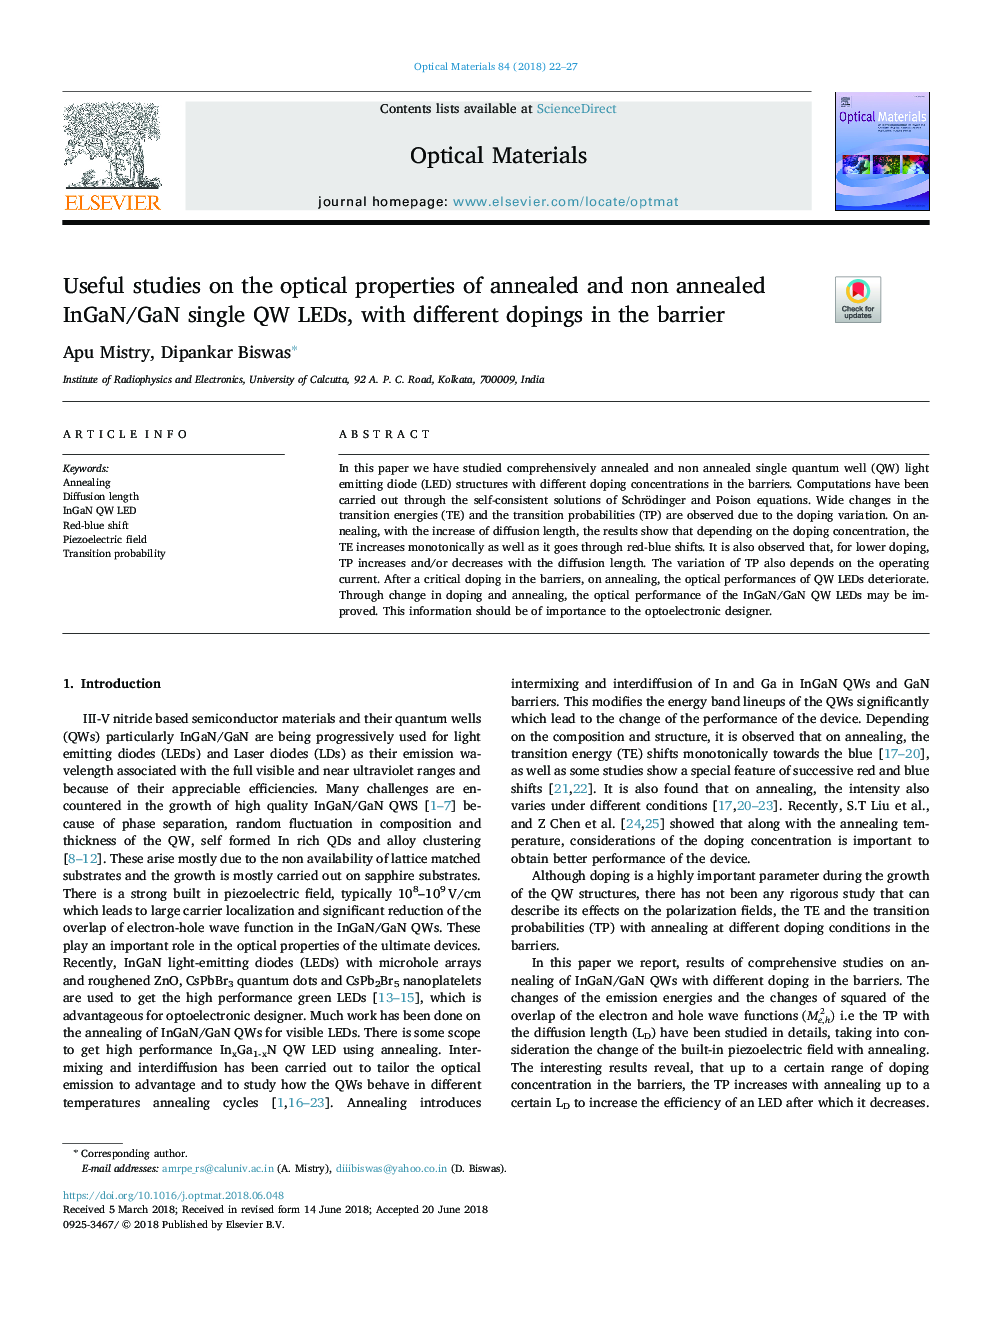 Useful studies on the optical properties of annealed and non annealed InGaN/GaN single QW LEDs, with different dopings in the barrier